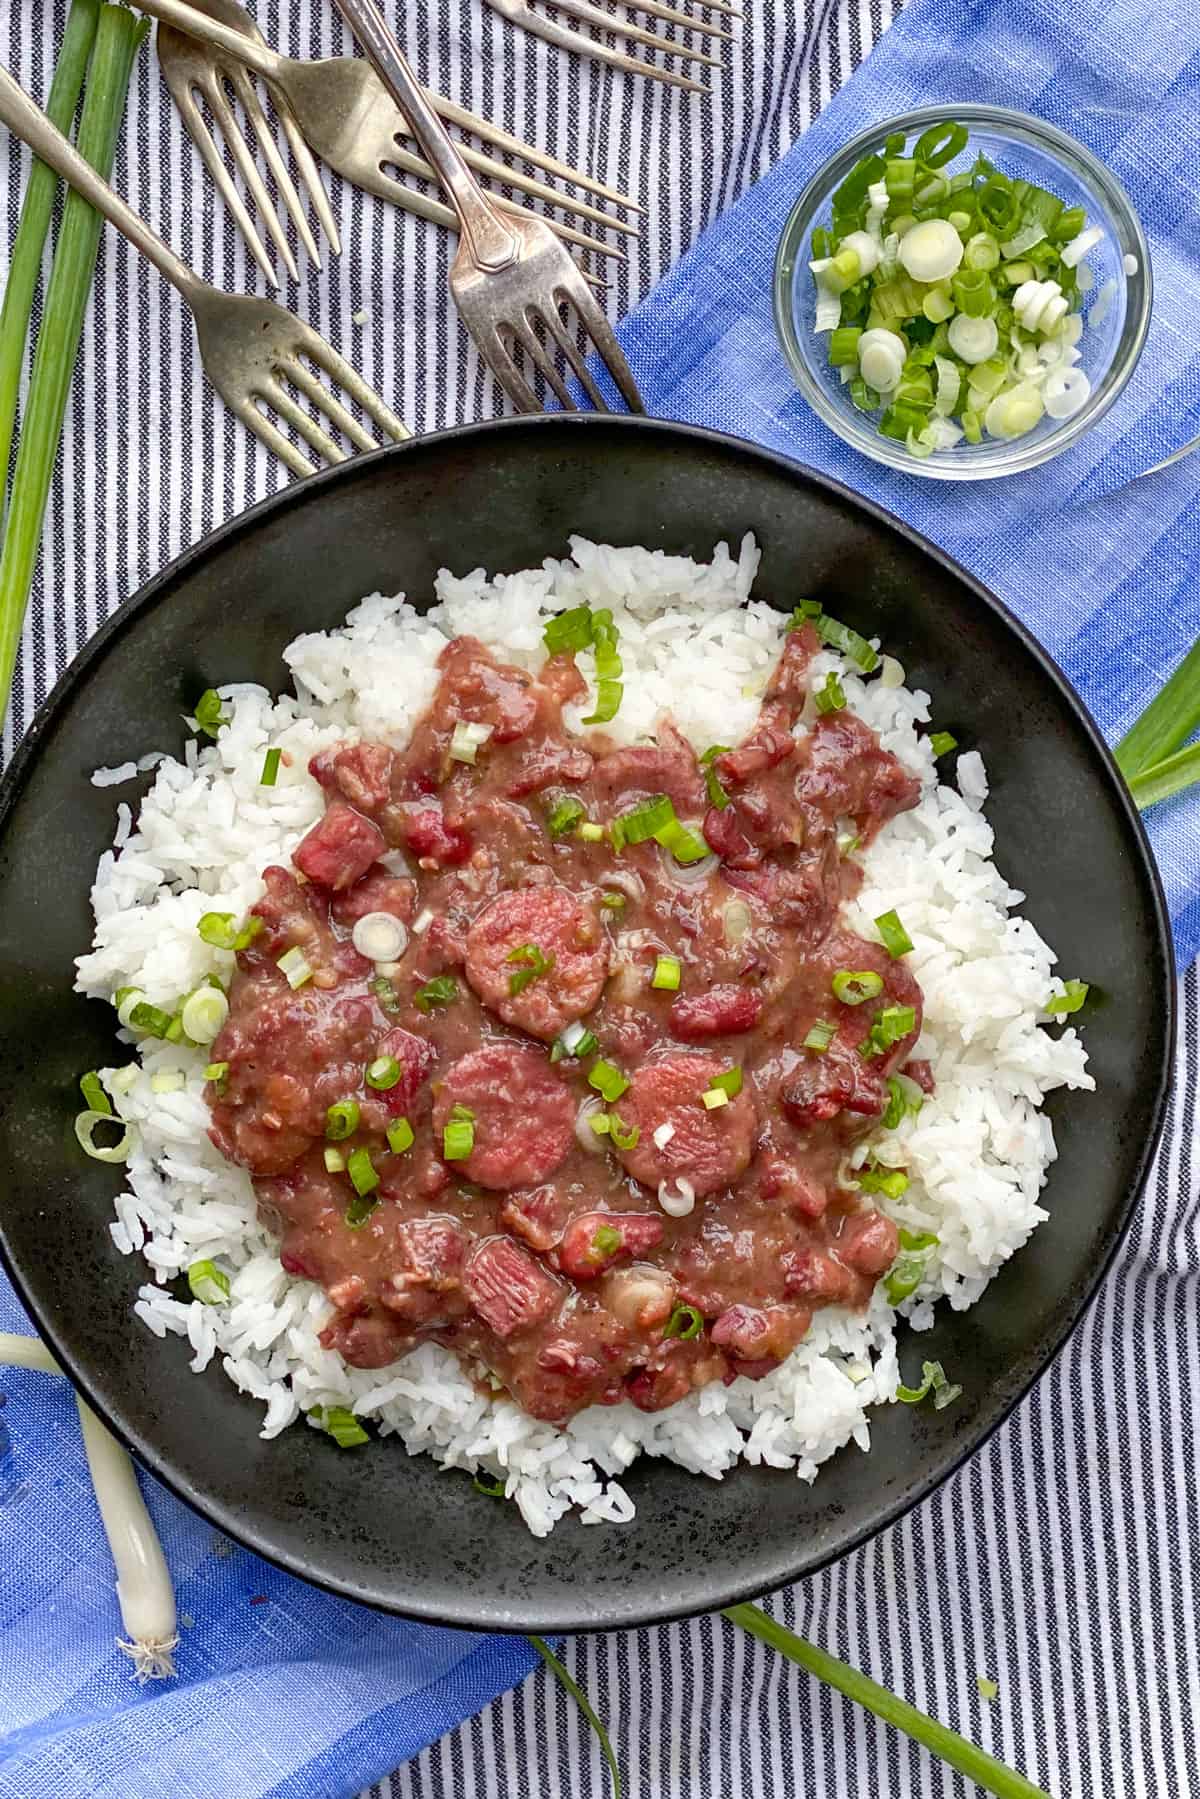 Louisiana-Style Red Beans & Rice with Chicken Sausage, Peppers & Onions